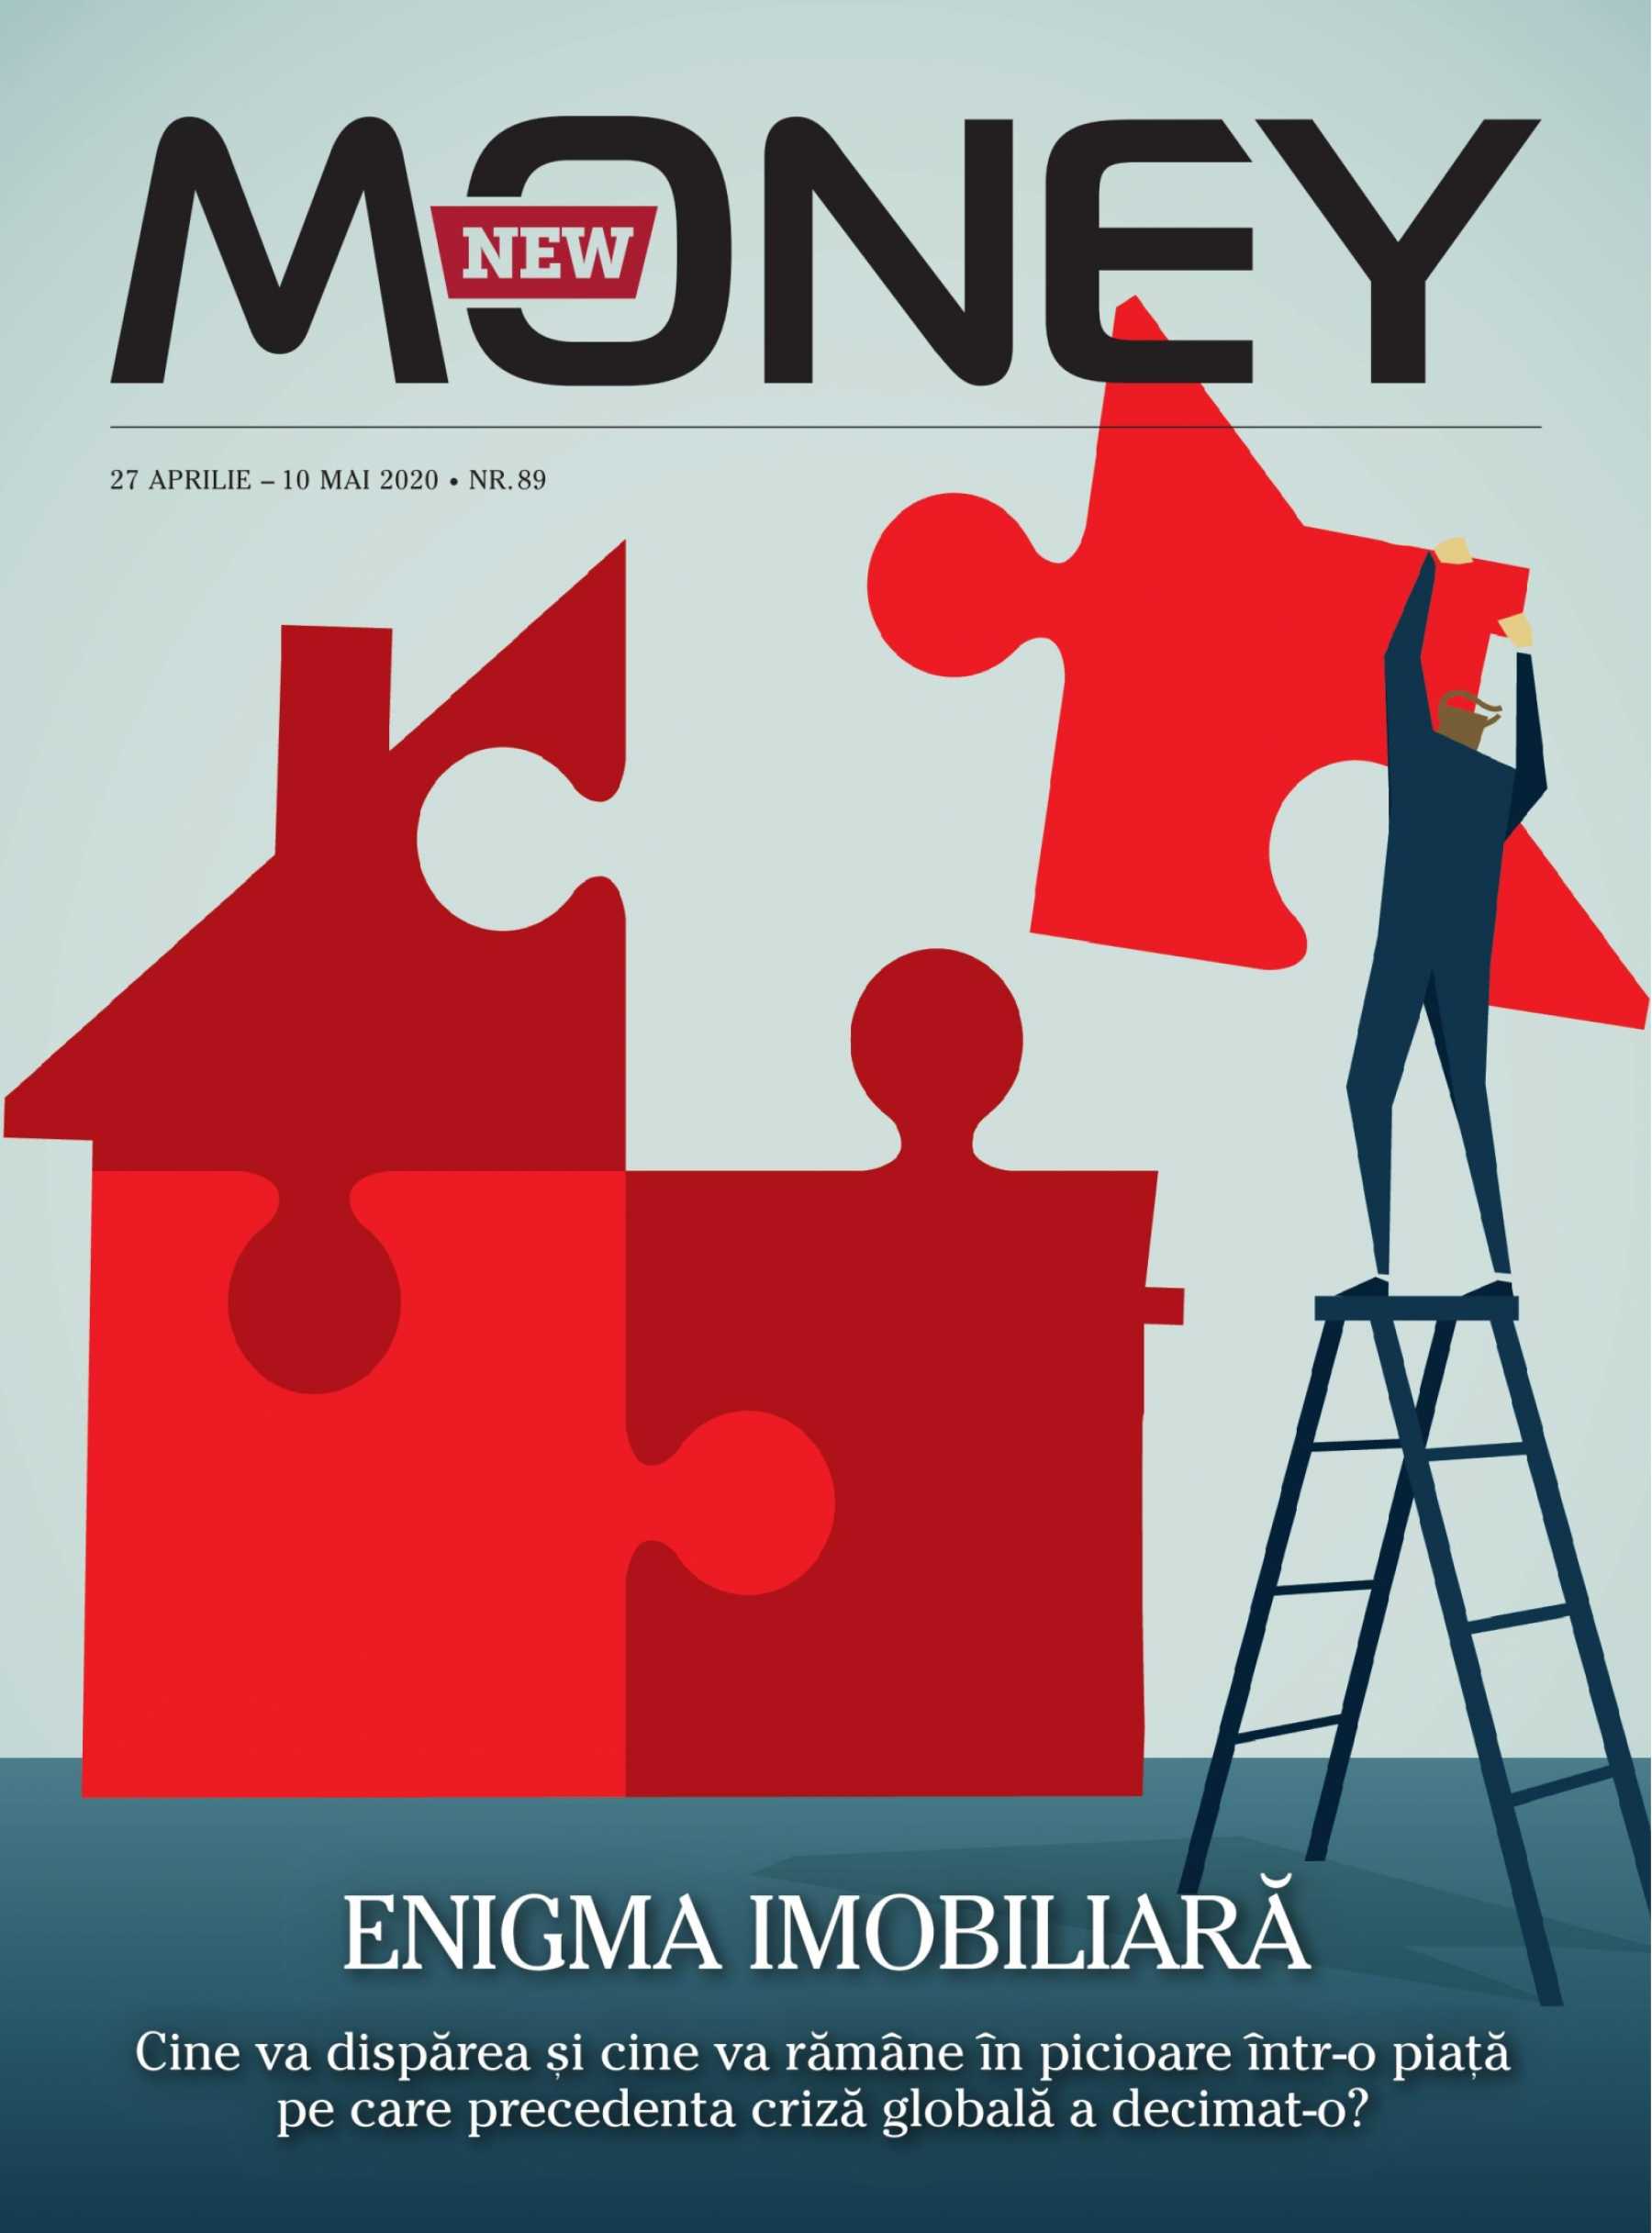 New Money analysis: Who will survive in real estate and who will not, on a market affected by crisis?